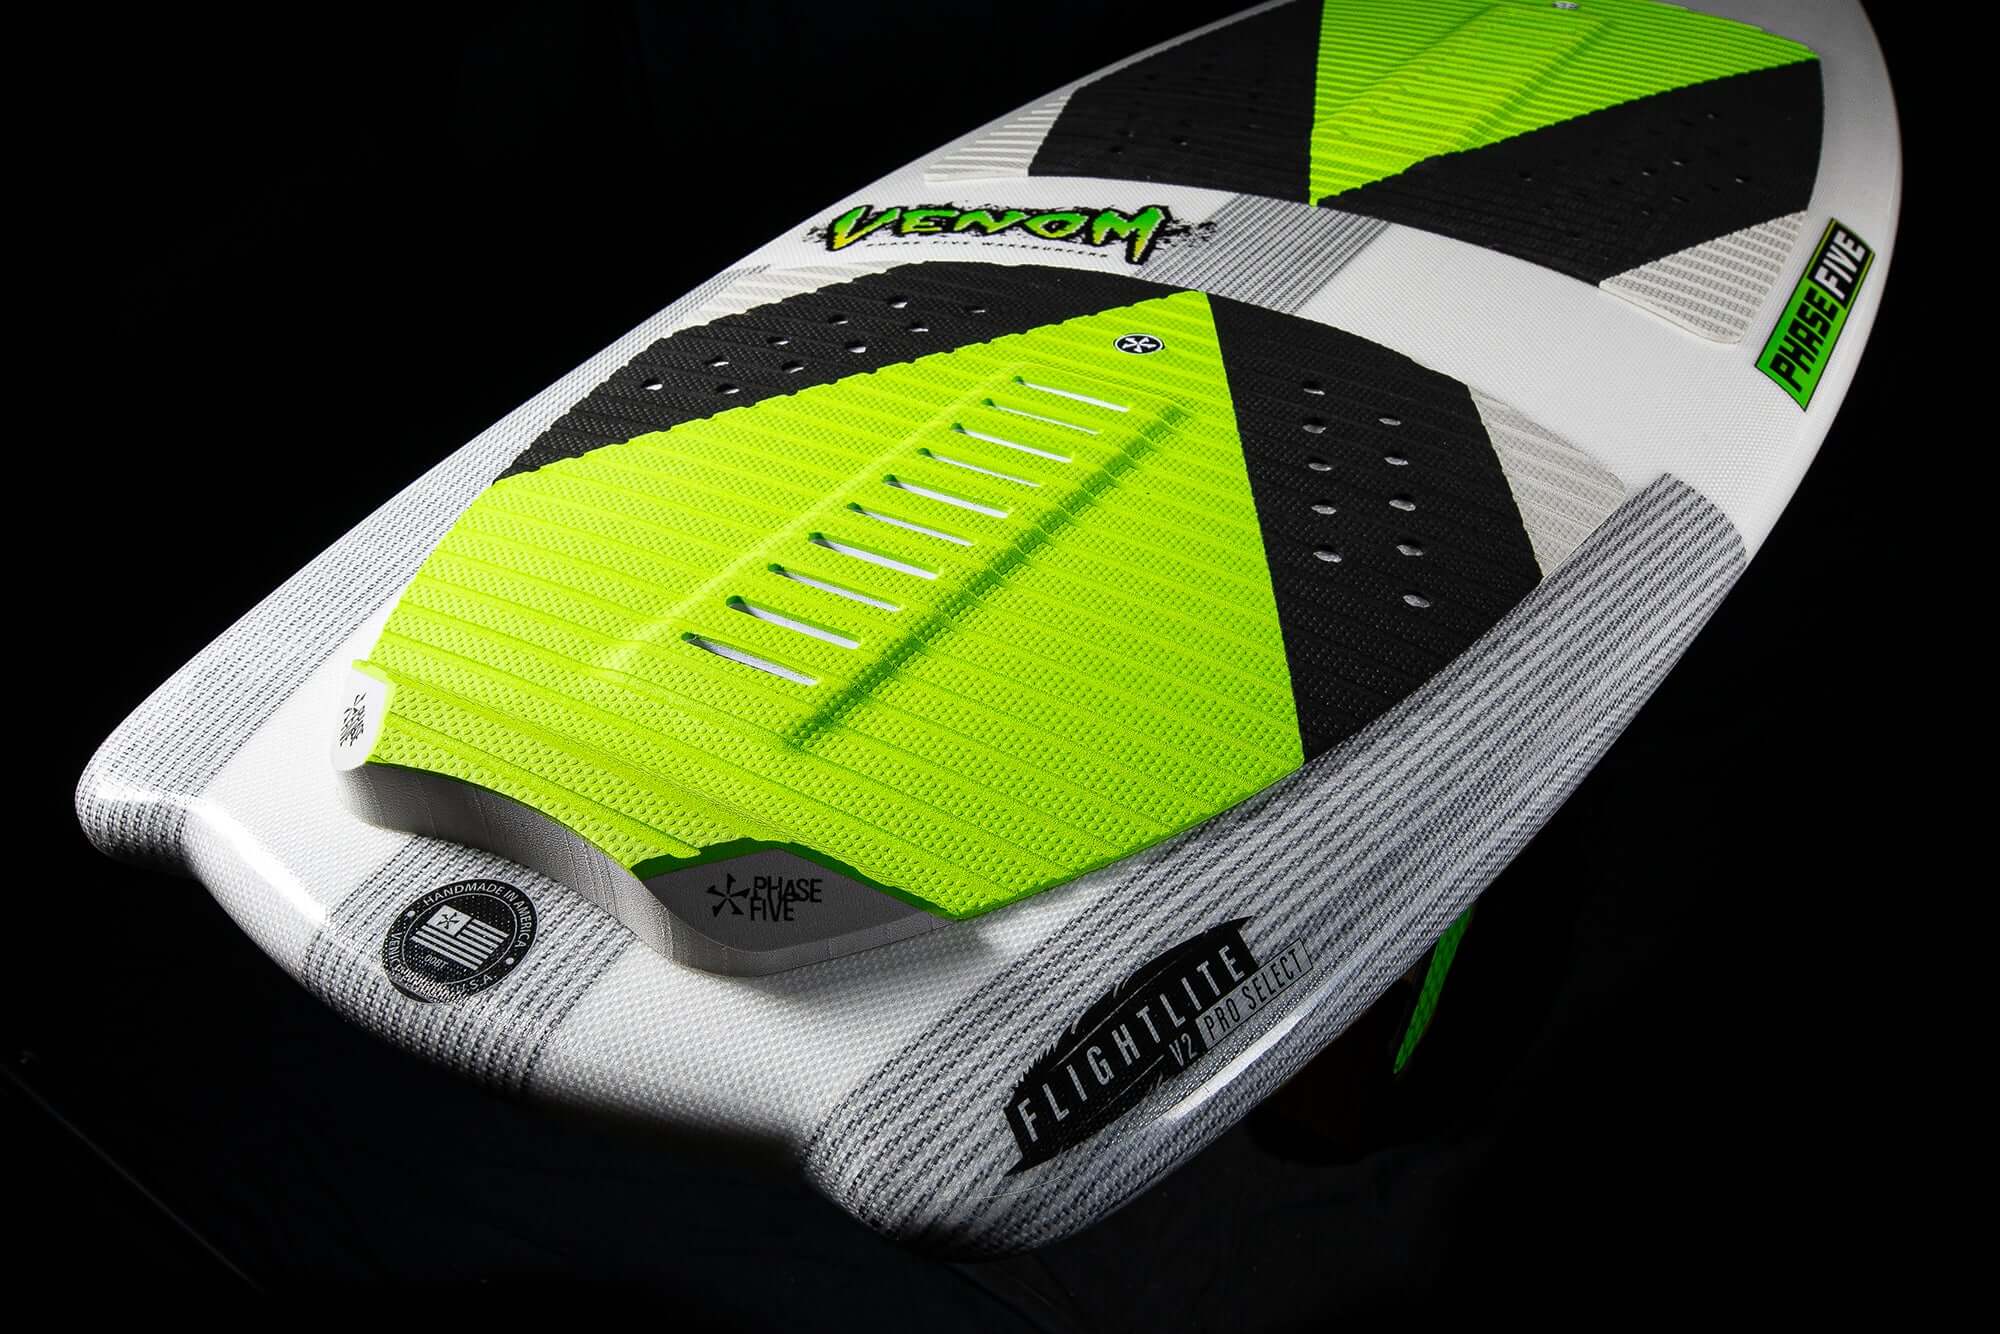 A high performance surfer Phase 5 Venom wakeboard on a black background.